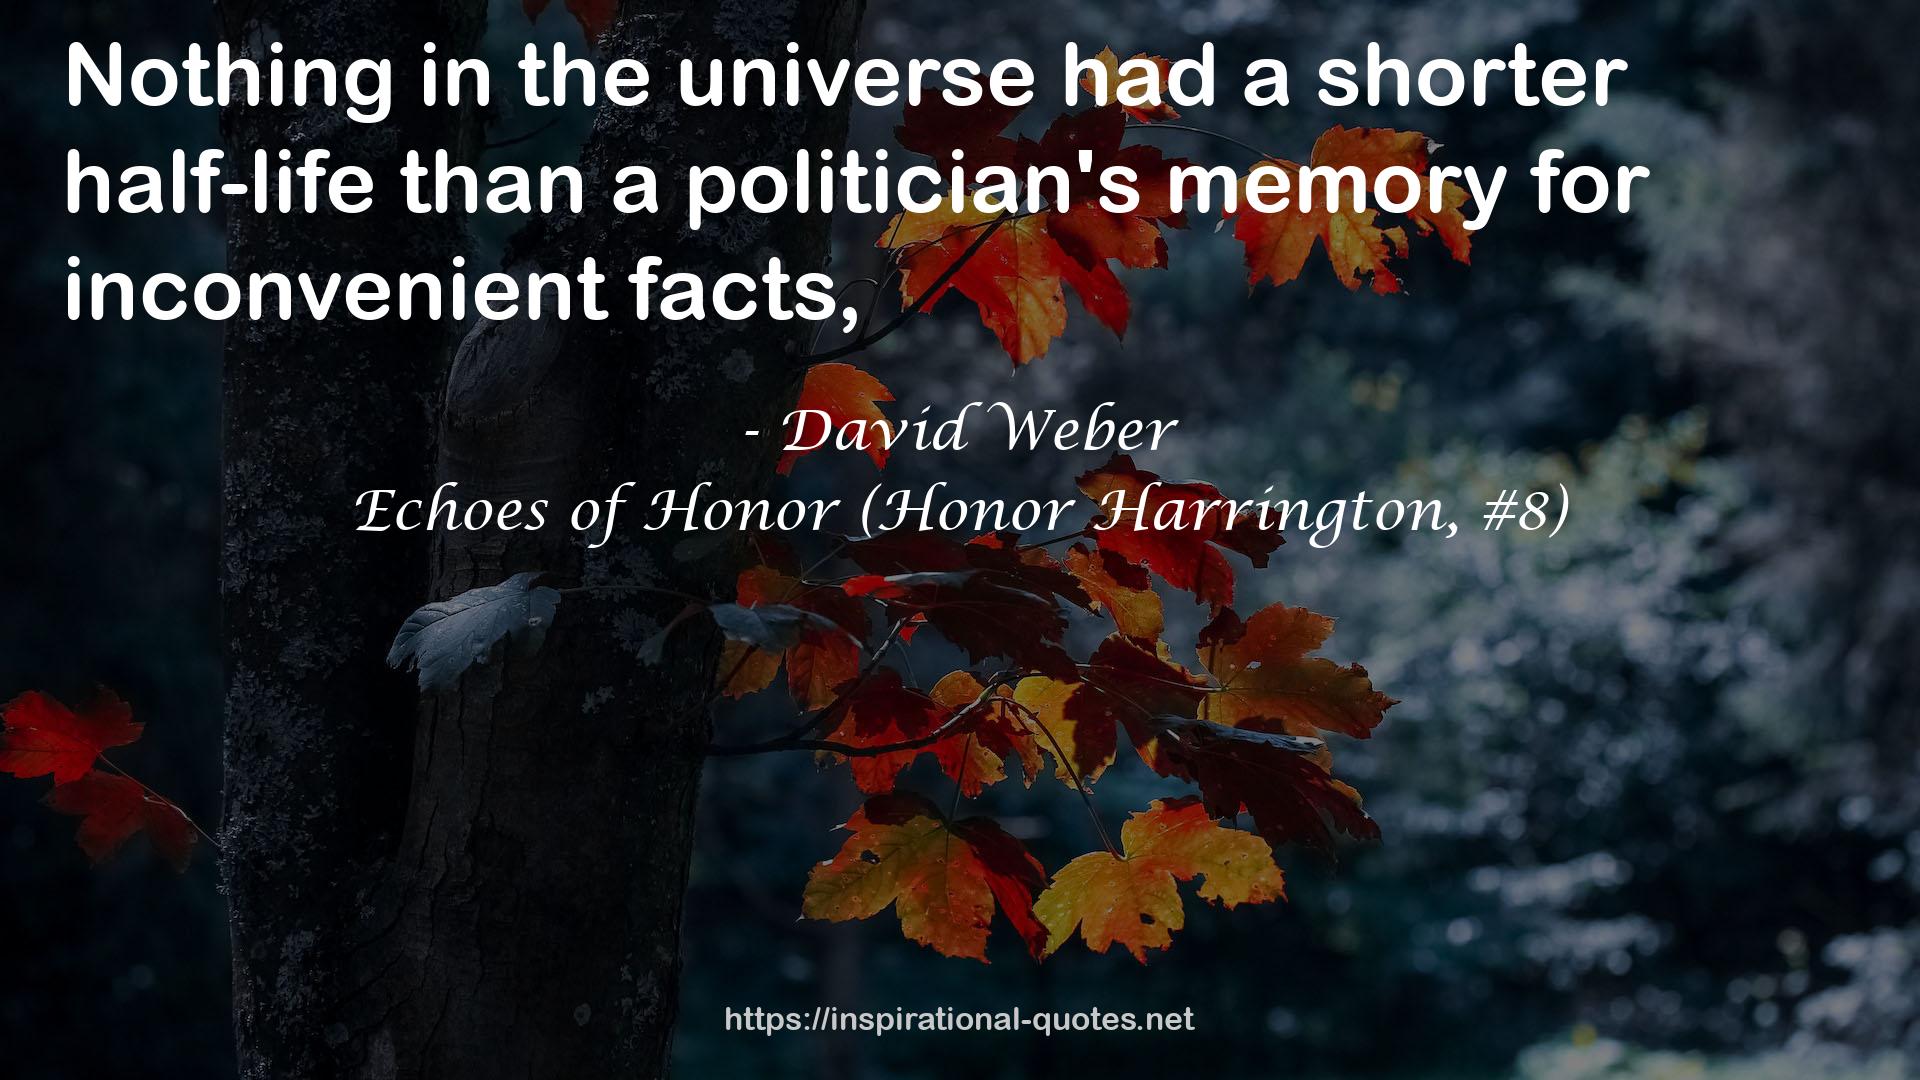 Echoes of Honor (Honor Harrington, #8) QUOTES